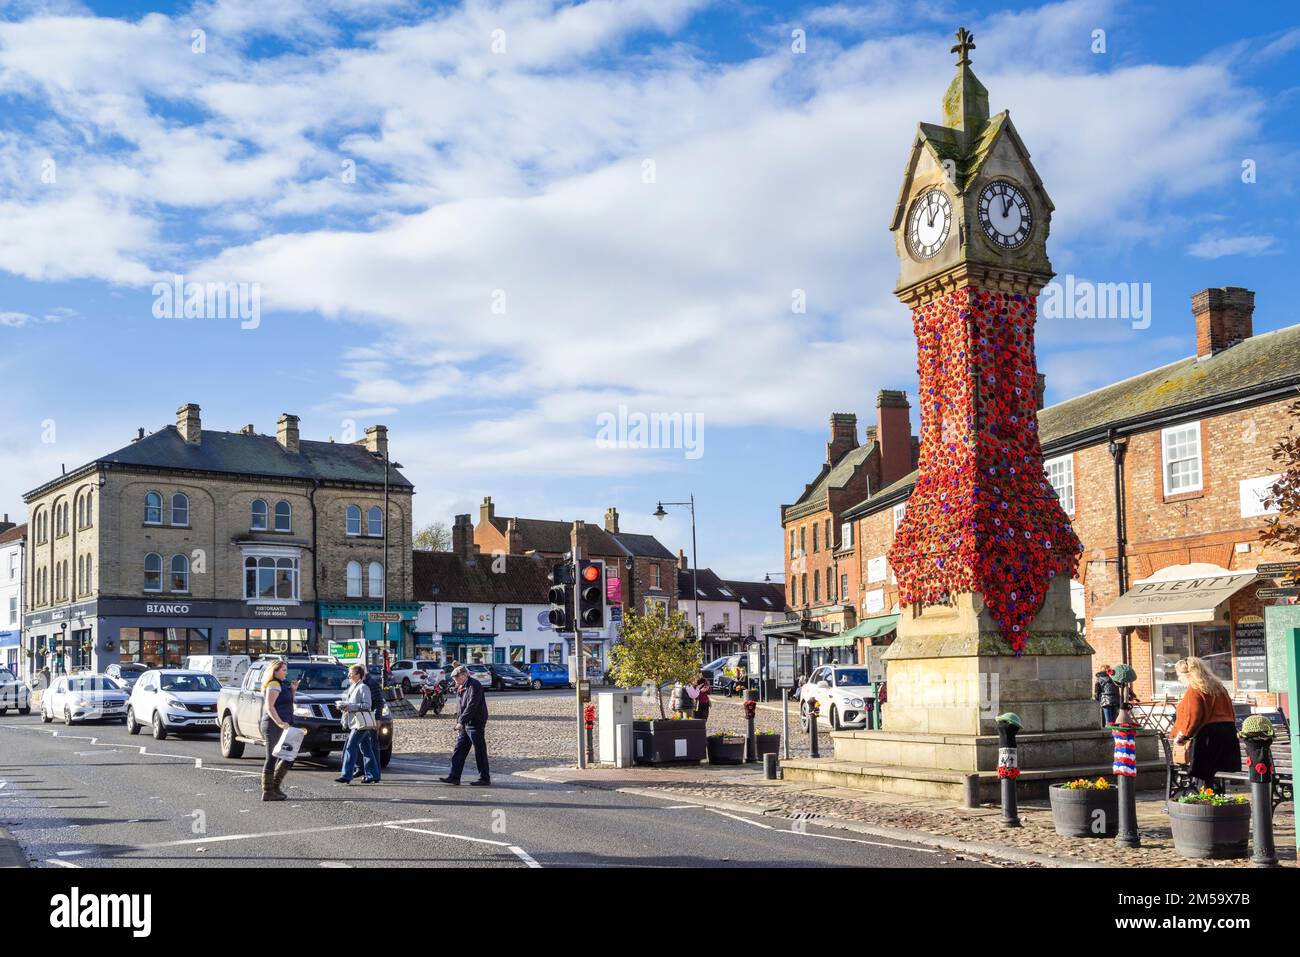 Thirsk North Yorkshire Thirsk Market place Clock Tower Thirsk avec des fils bombardant thirsk North Yorkshire Angleterre GB Europe Banque D'Images